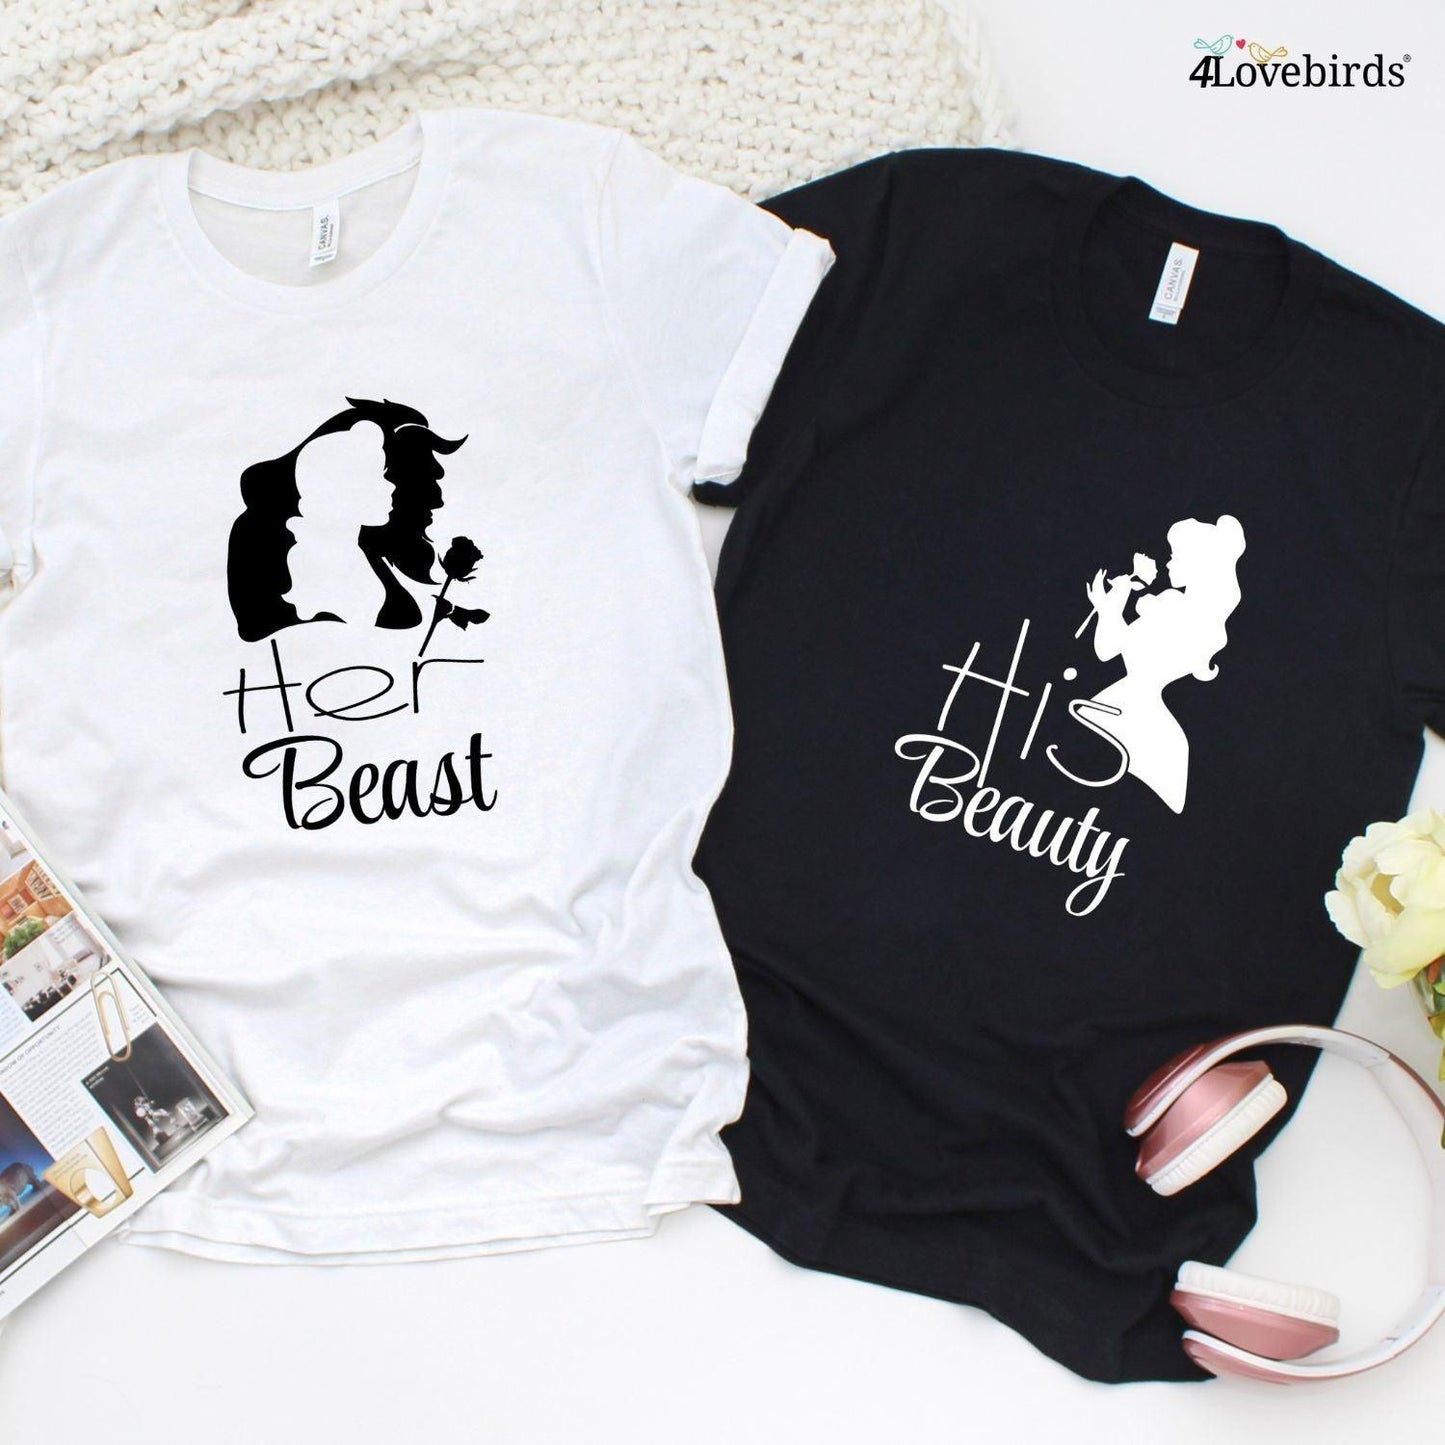 Couples' Delight: His Beauty & Her Beast Matching Outfits - Perfect Gift Idea! - 4Lovebirds